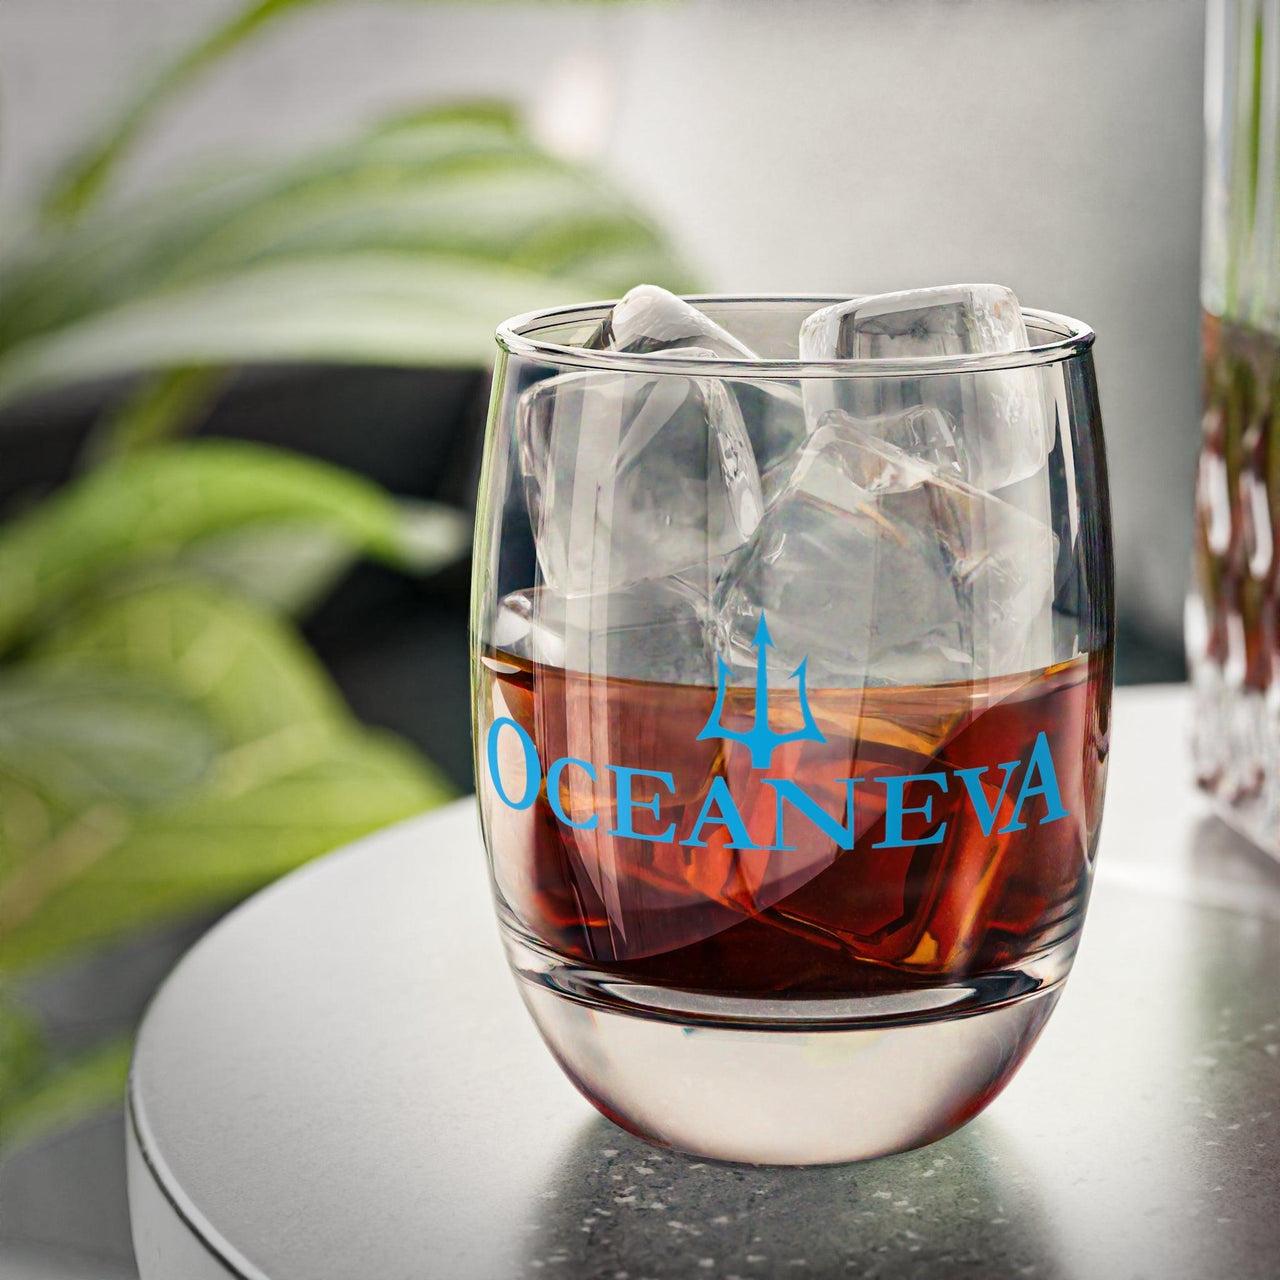 Oceaneva Whiskey Glass - 31234513002107062171 Assembled in the USA, Assembled in USA, Beverage, Drink, Drinks, Glass, Glassware, Home & Living, Made in the USA, Made in USA